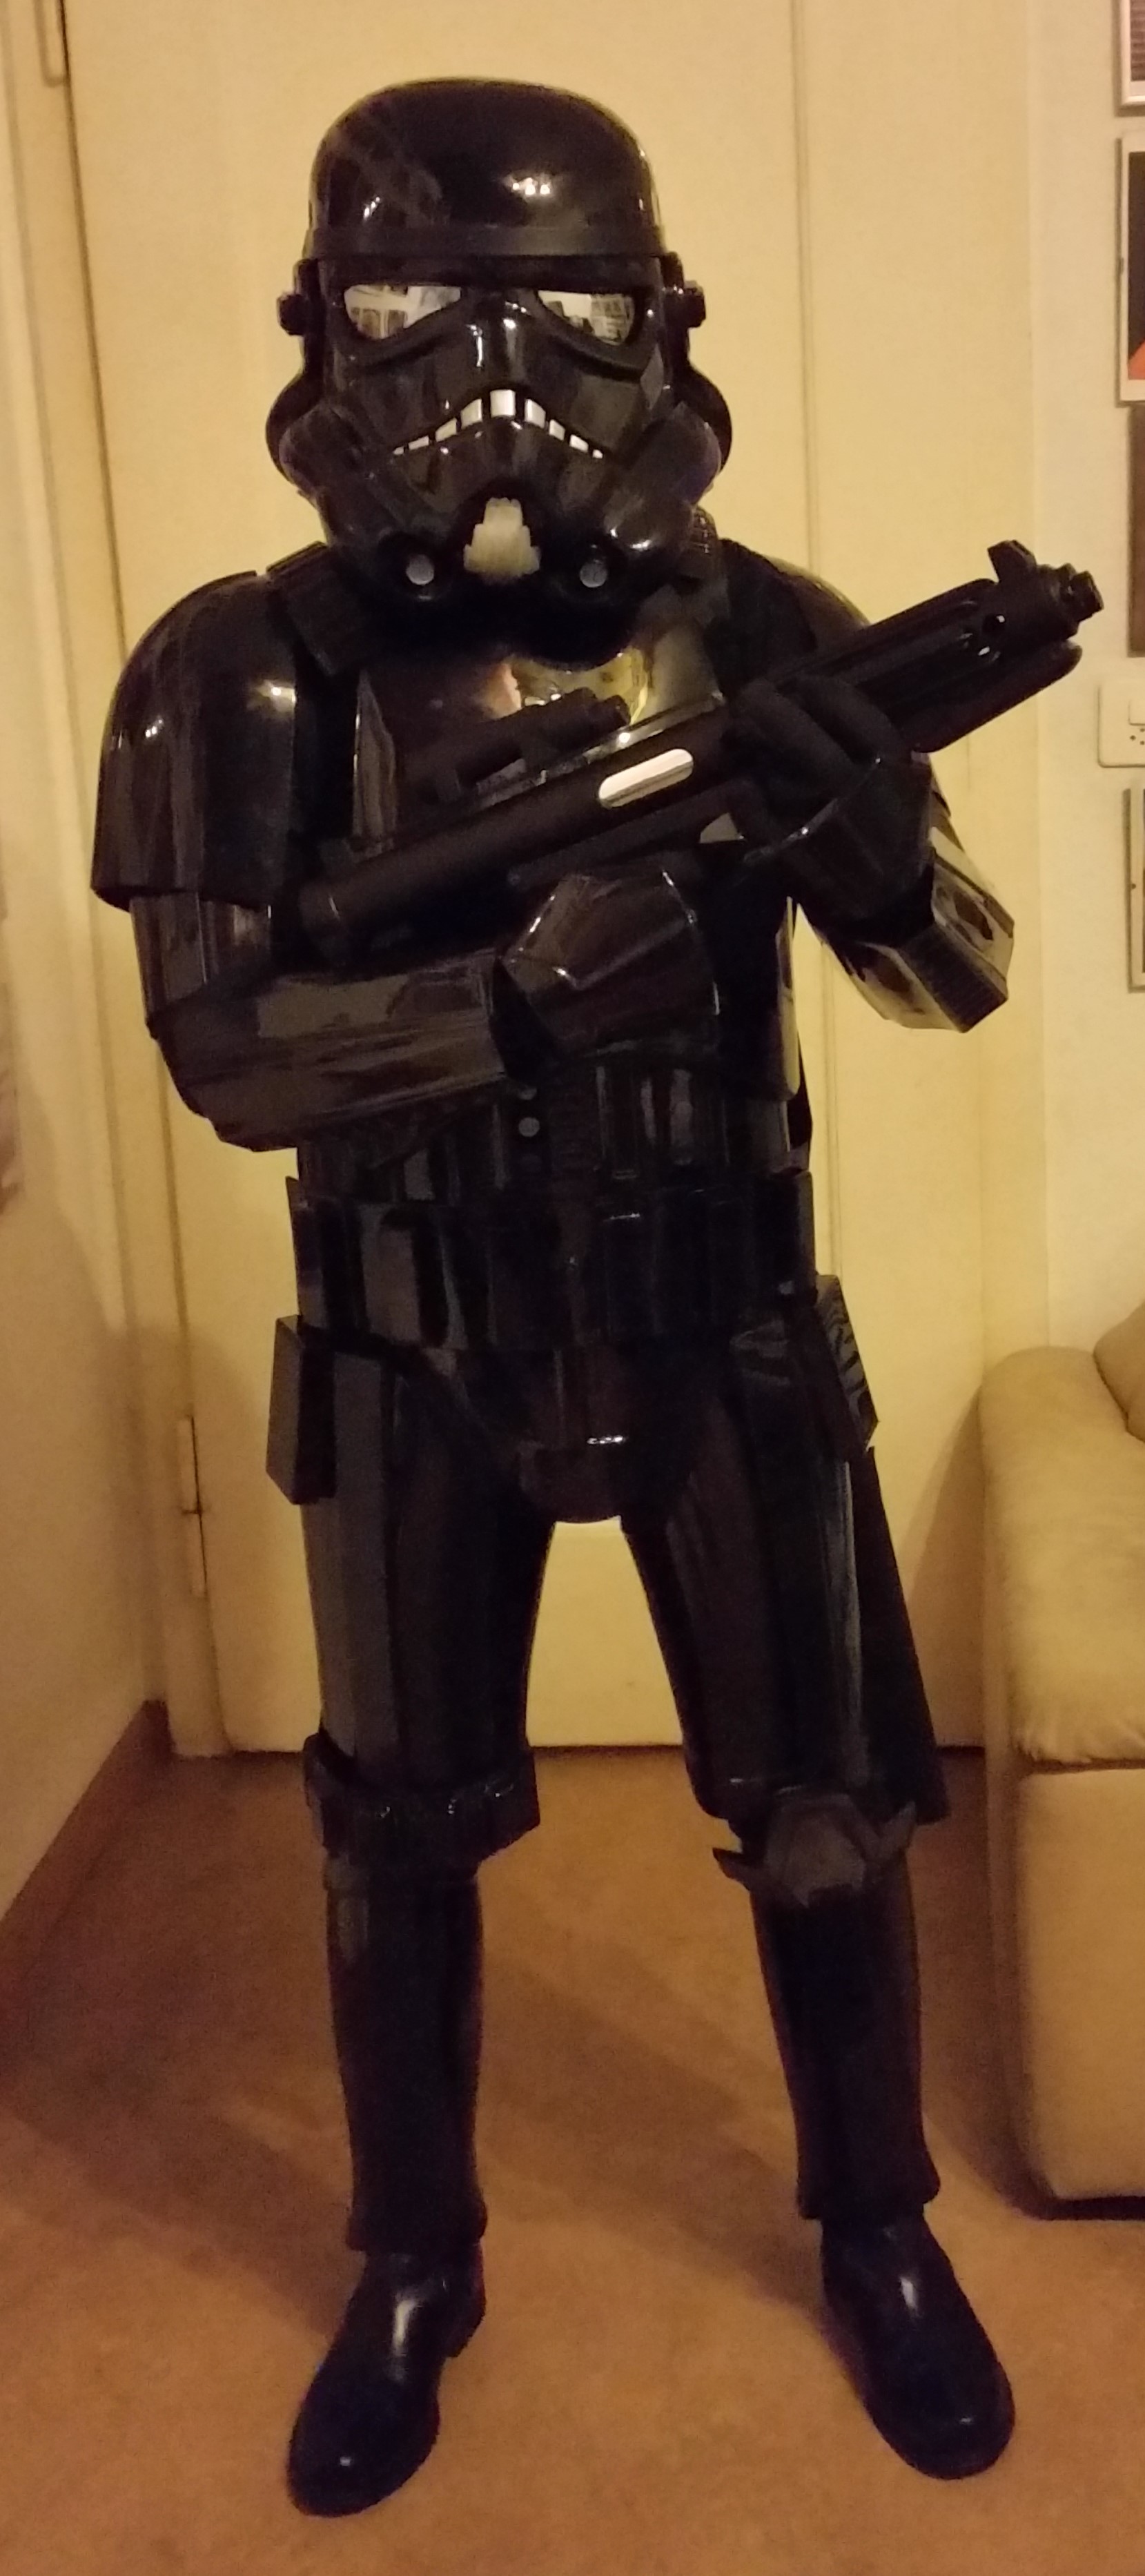 Rolf Star Wars Battlefront Shadowtrooper Replica Costume Review